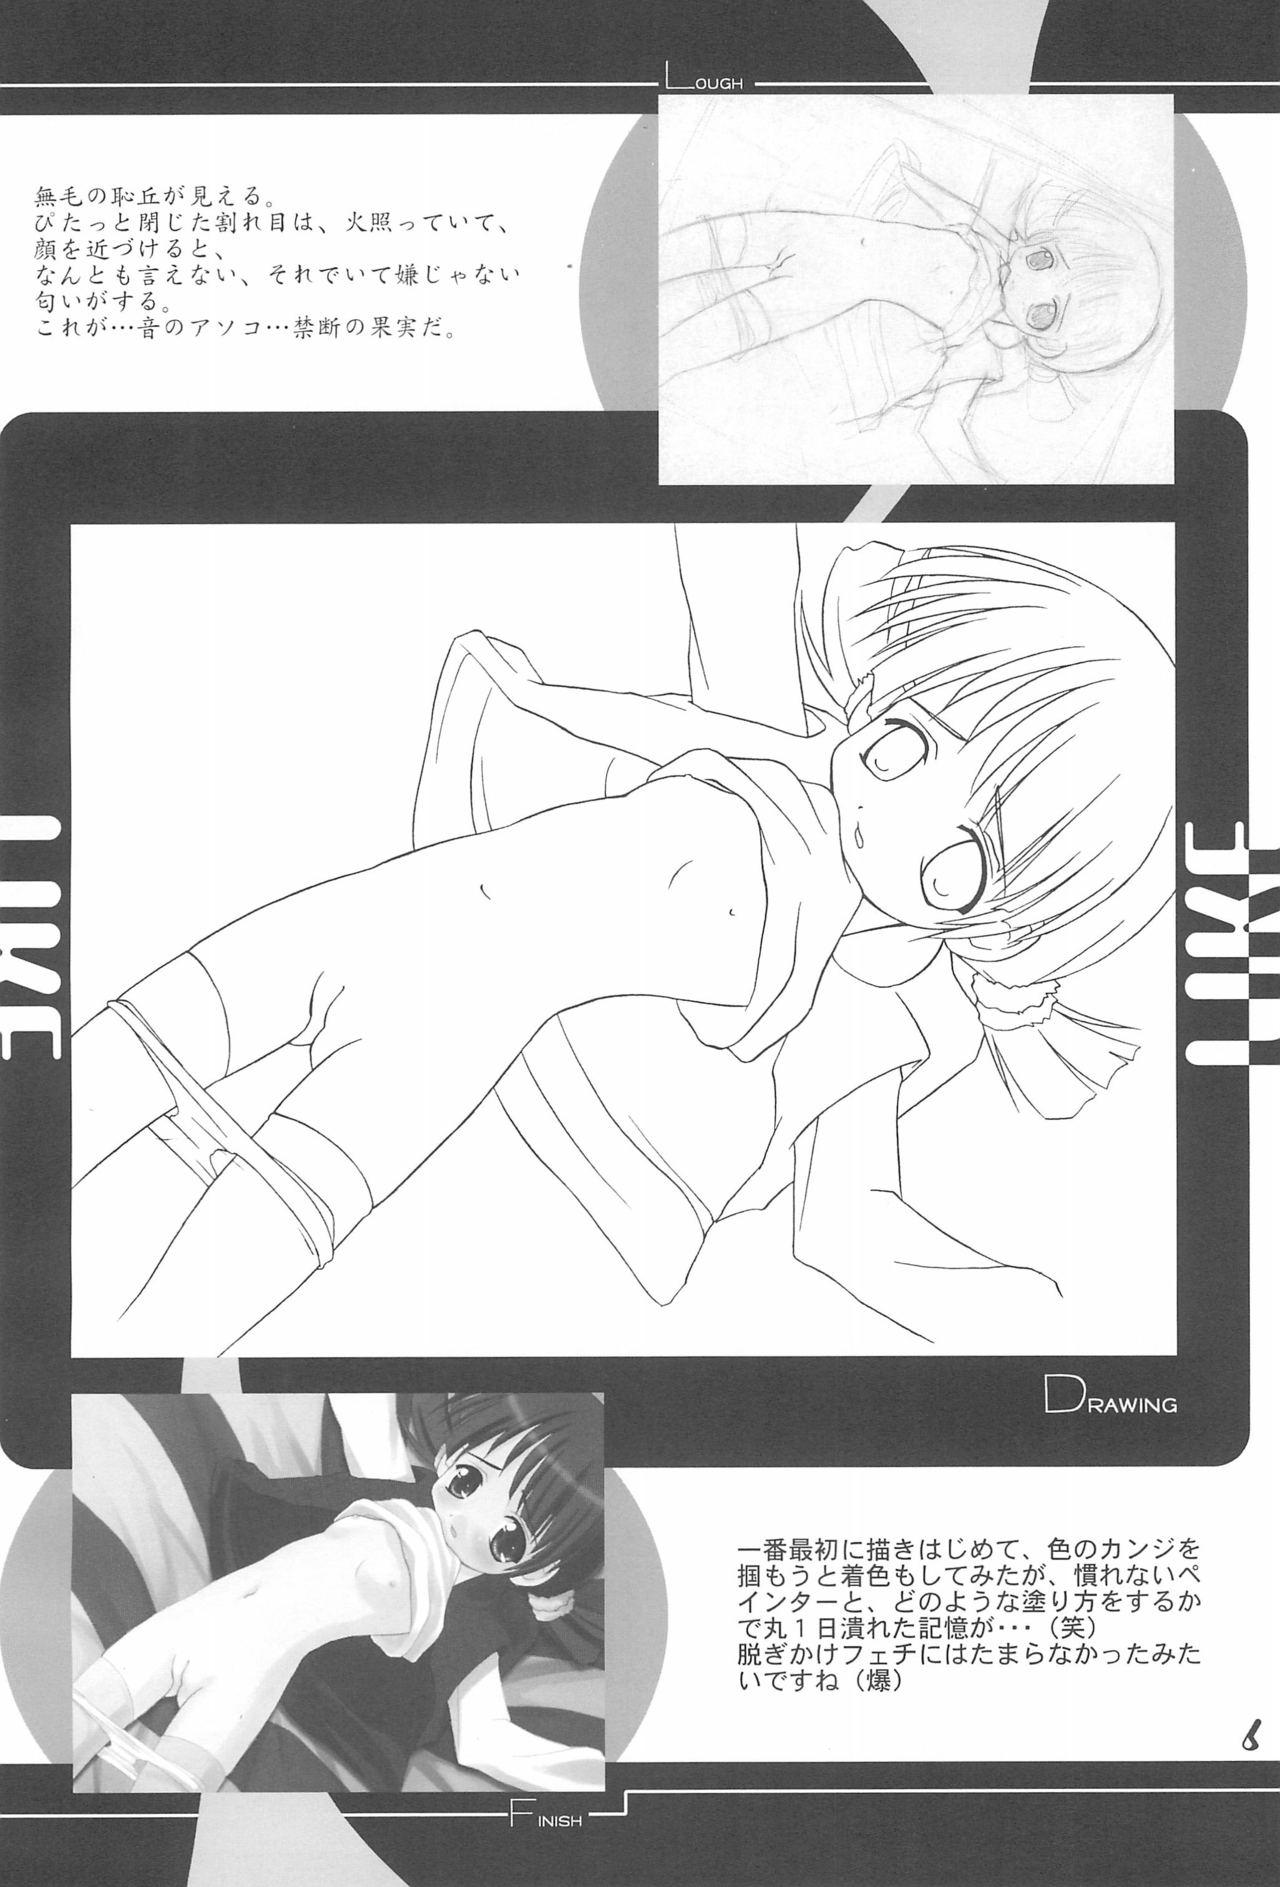 Eating Pussy (C59) [Oden-ya (Misooden)] LIKE 1-2-3+ Imouto - Original Transexual - Page 6